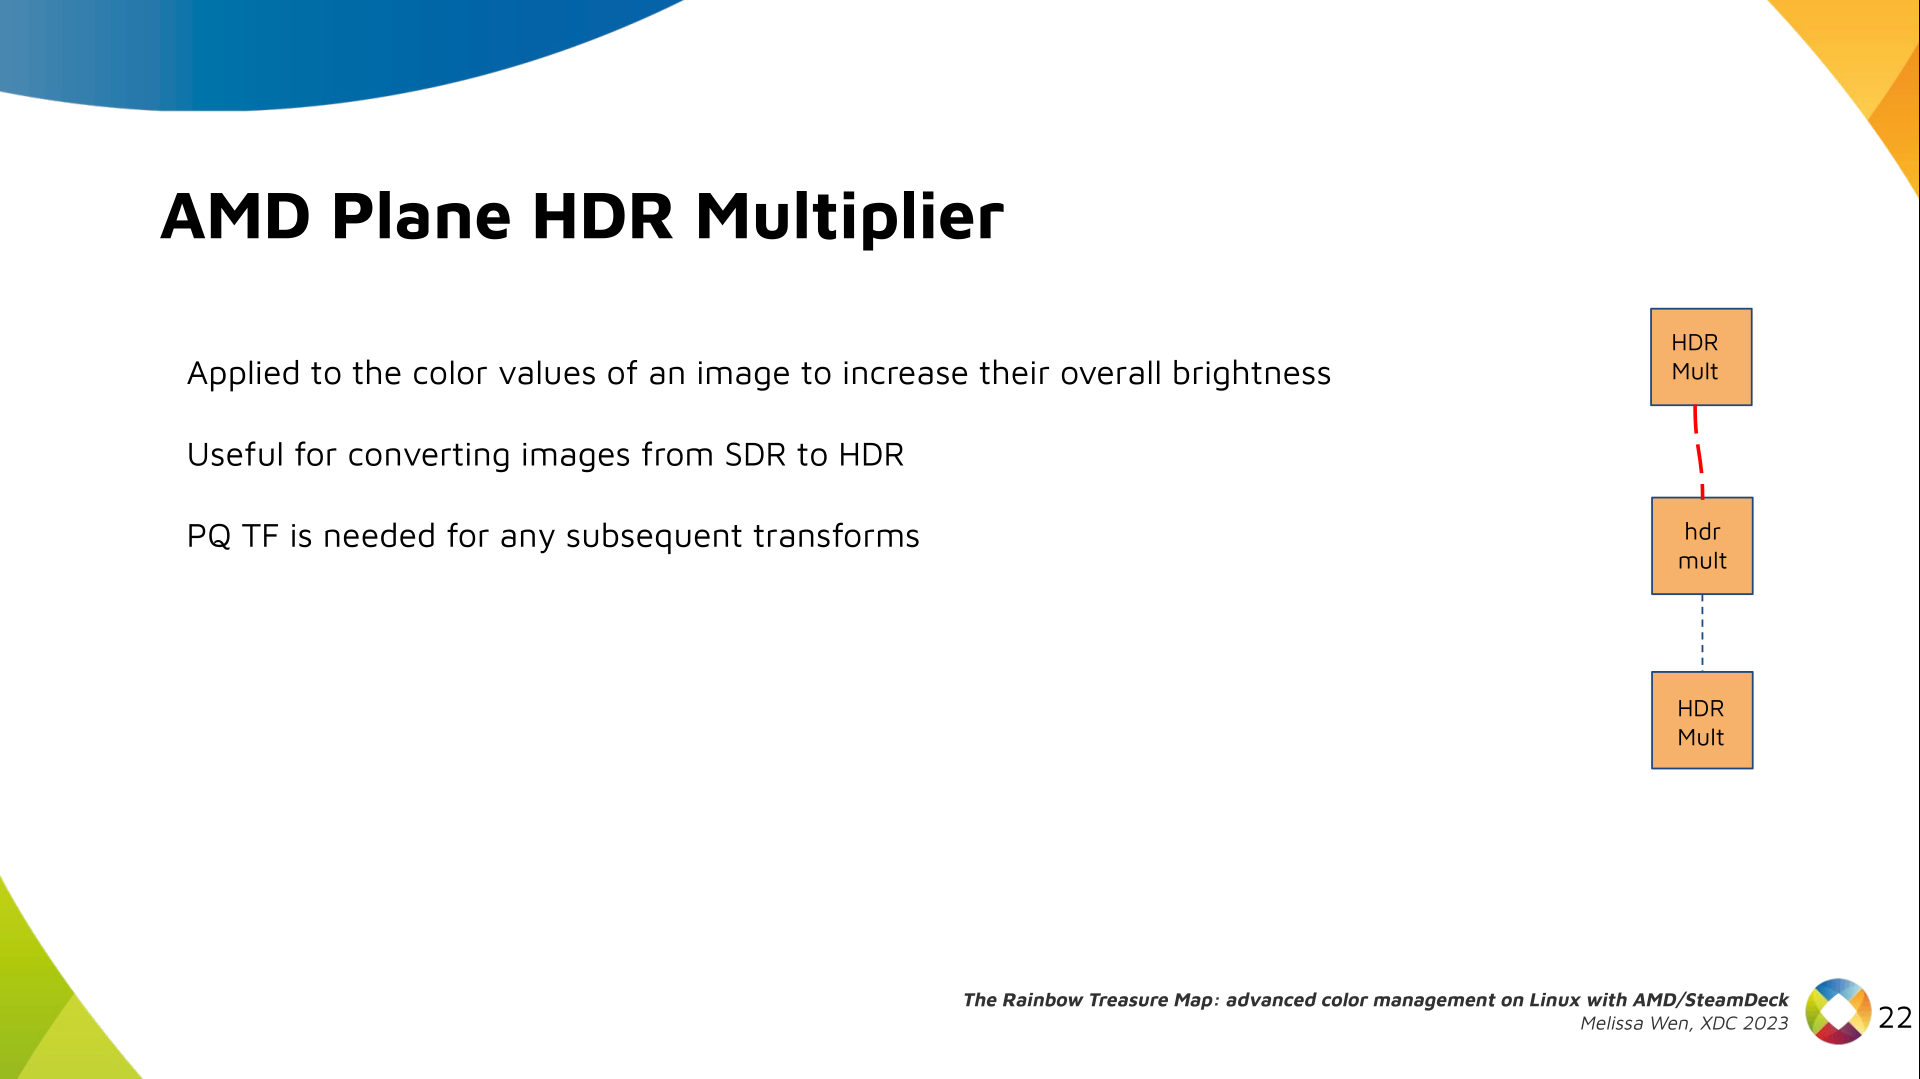 Slide 20: Describe plane HDR mult property and hardware capabilities